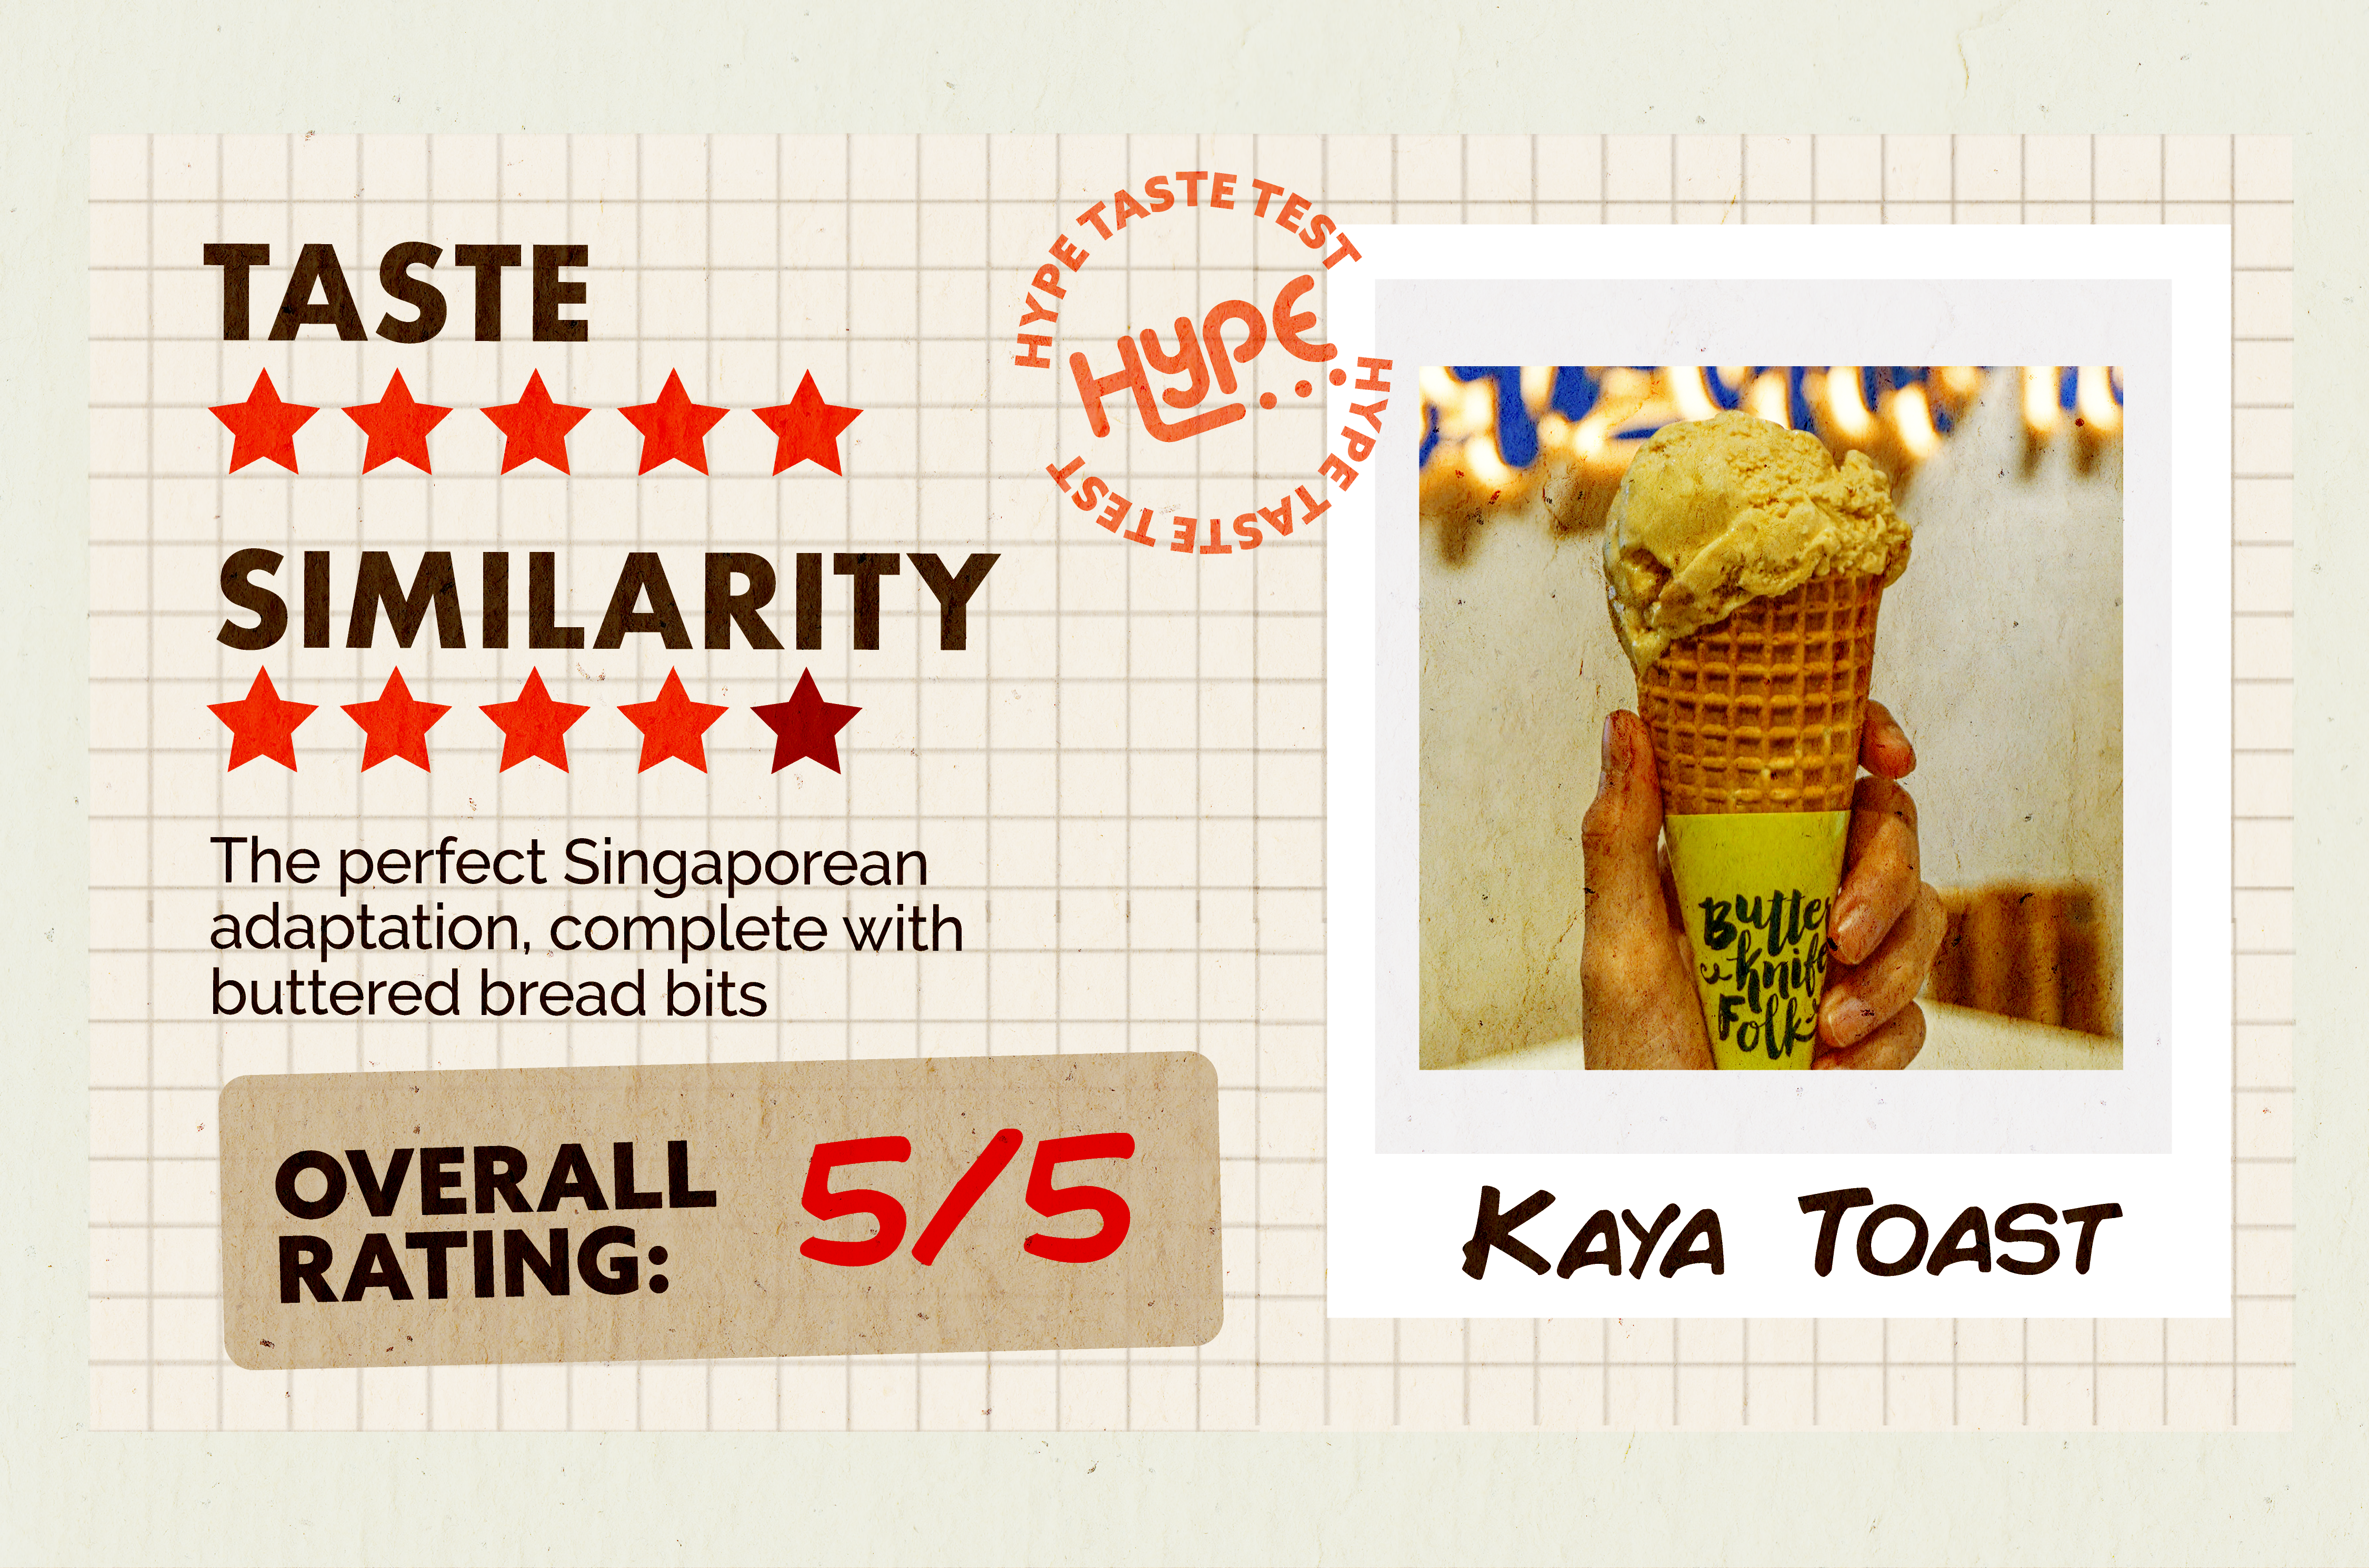 HYPE's rating for Kaya Toast, 5/5